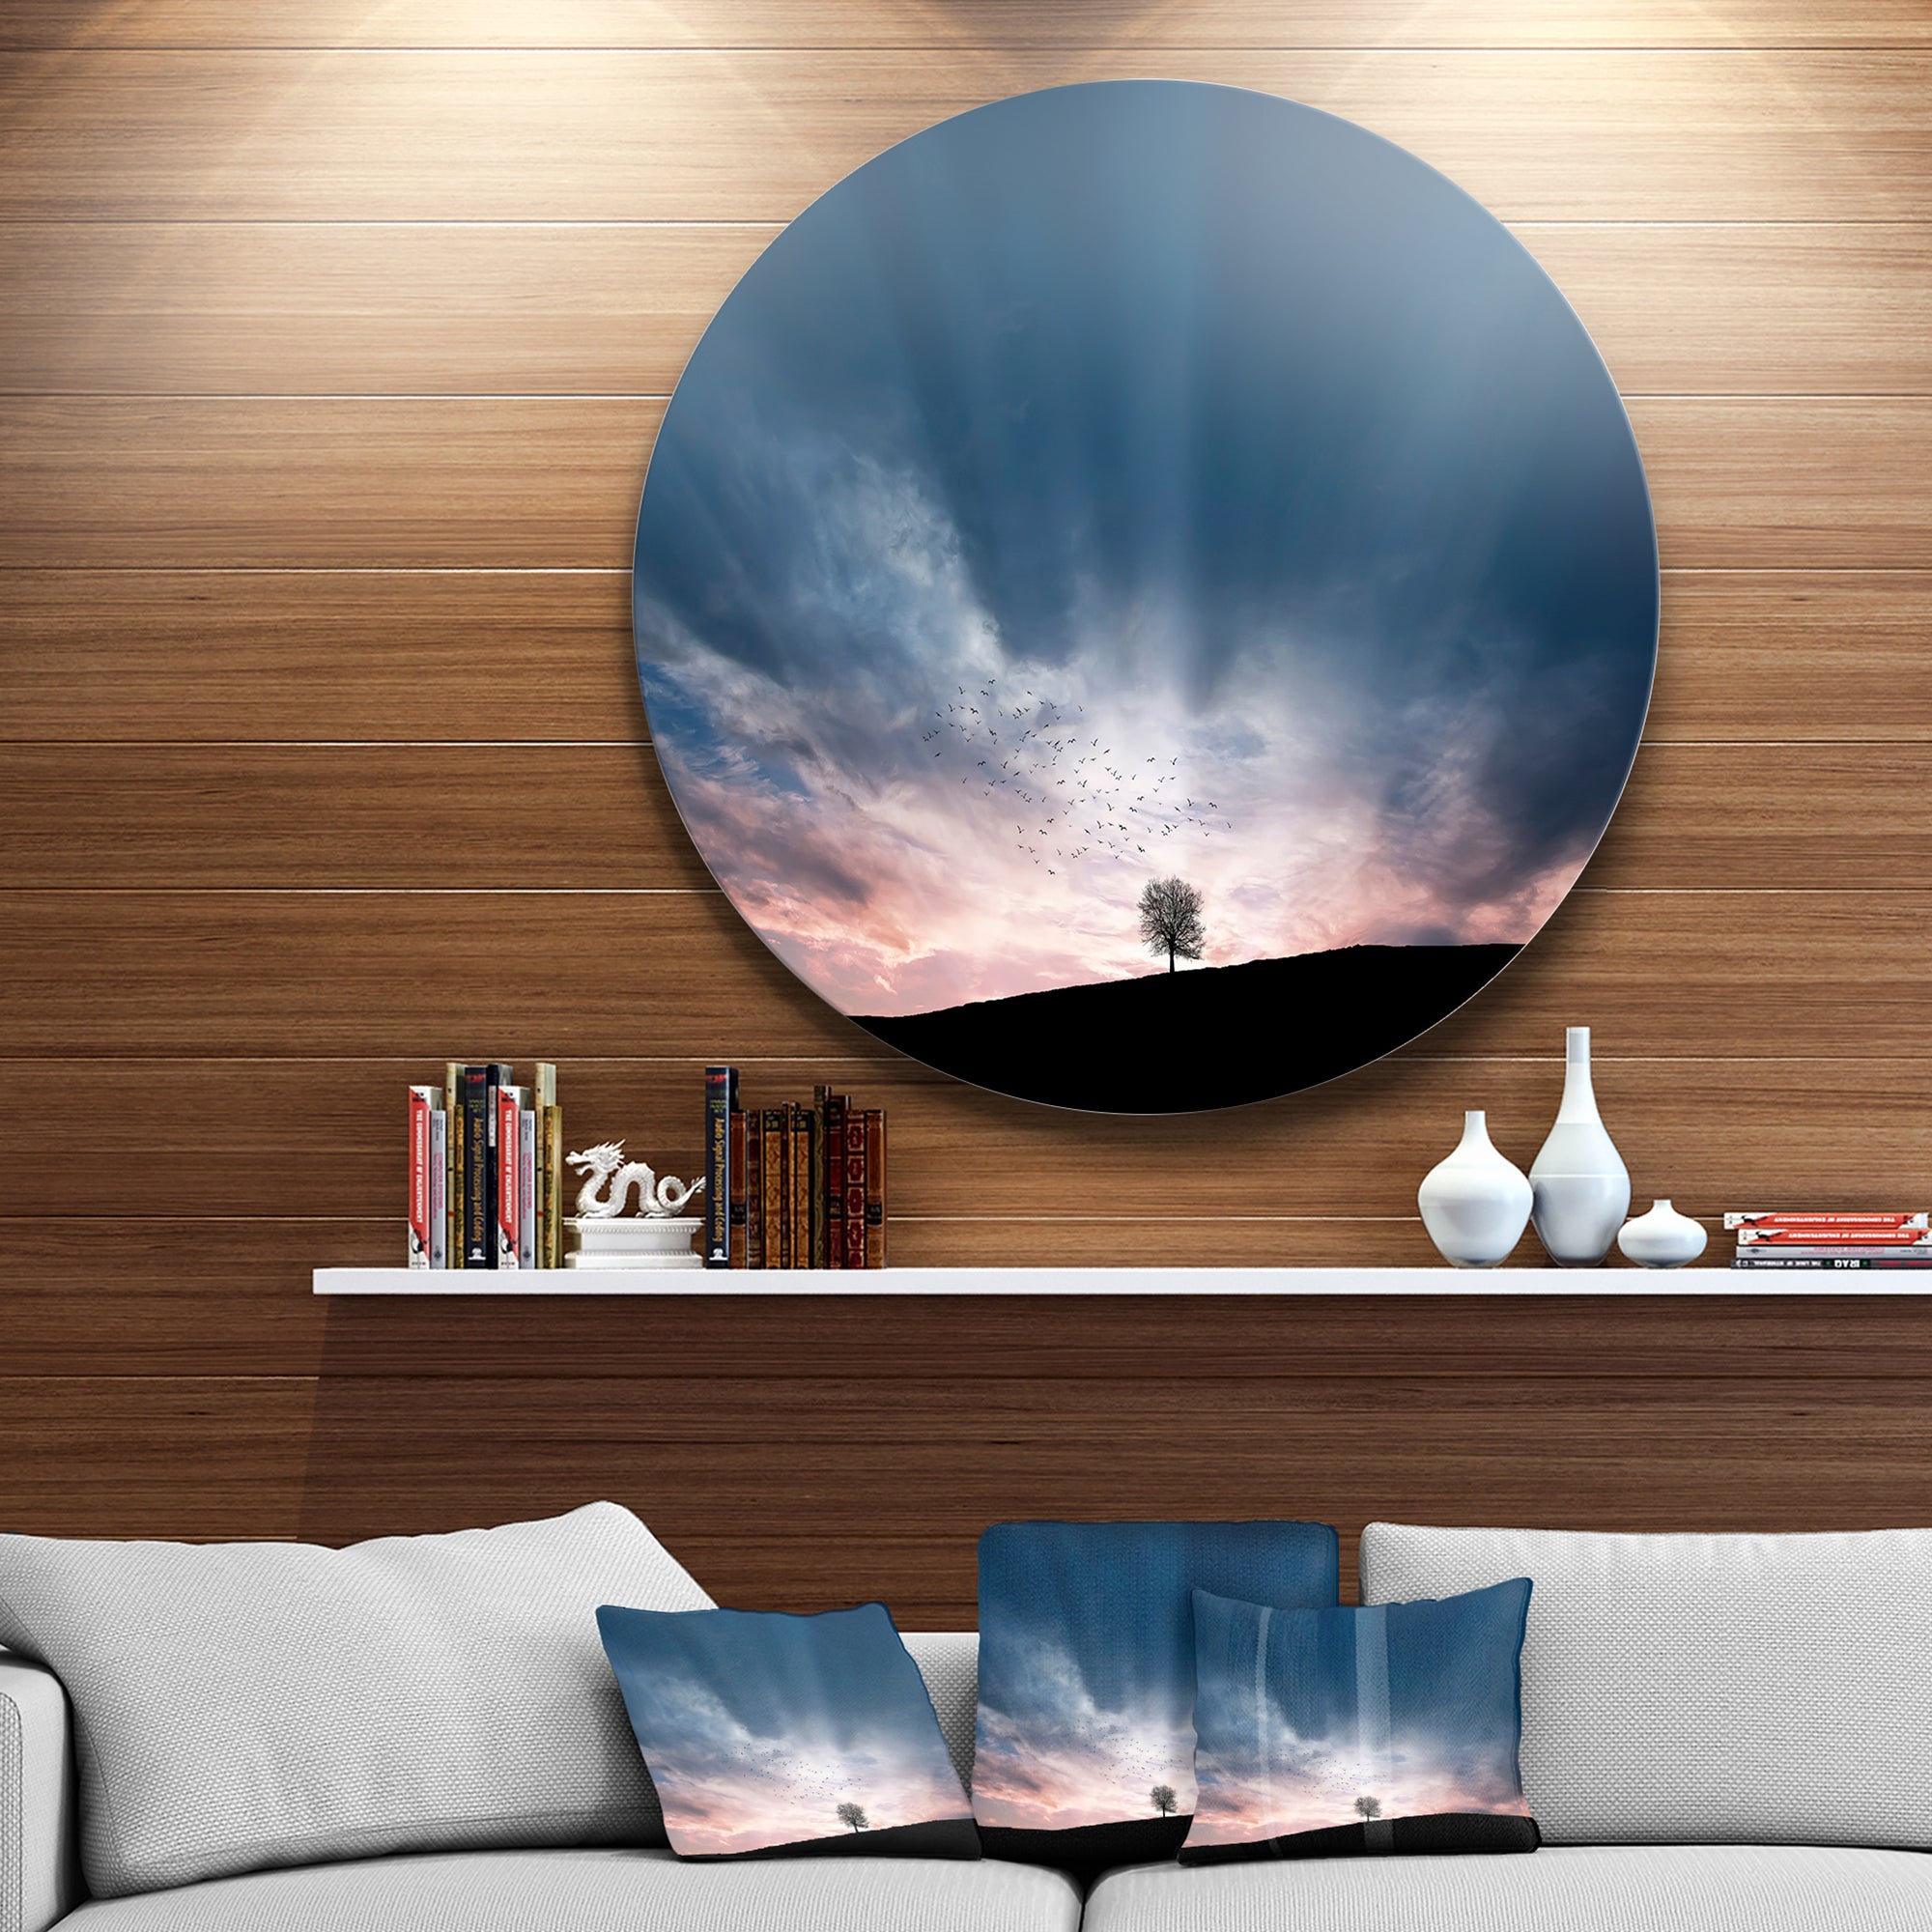 Flock of Birds and Lonely Tree' Extra Large Wall Art Landscape